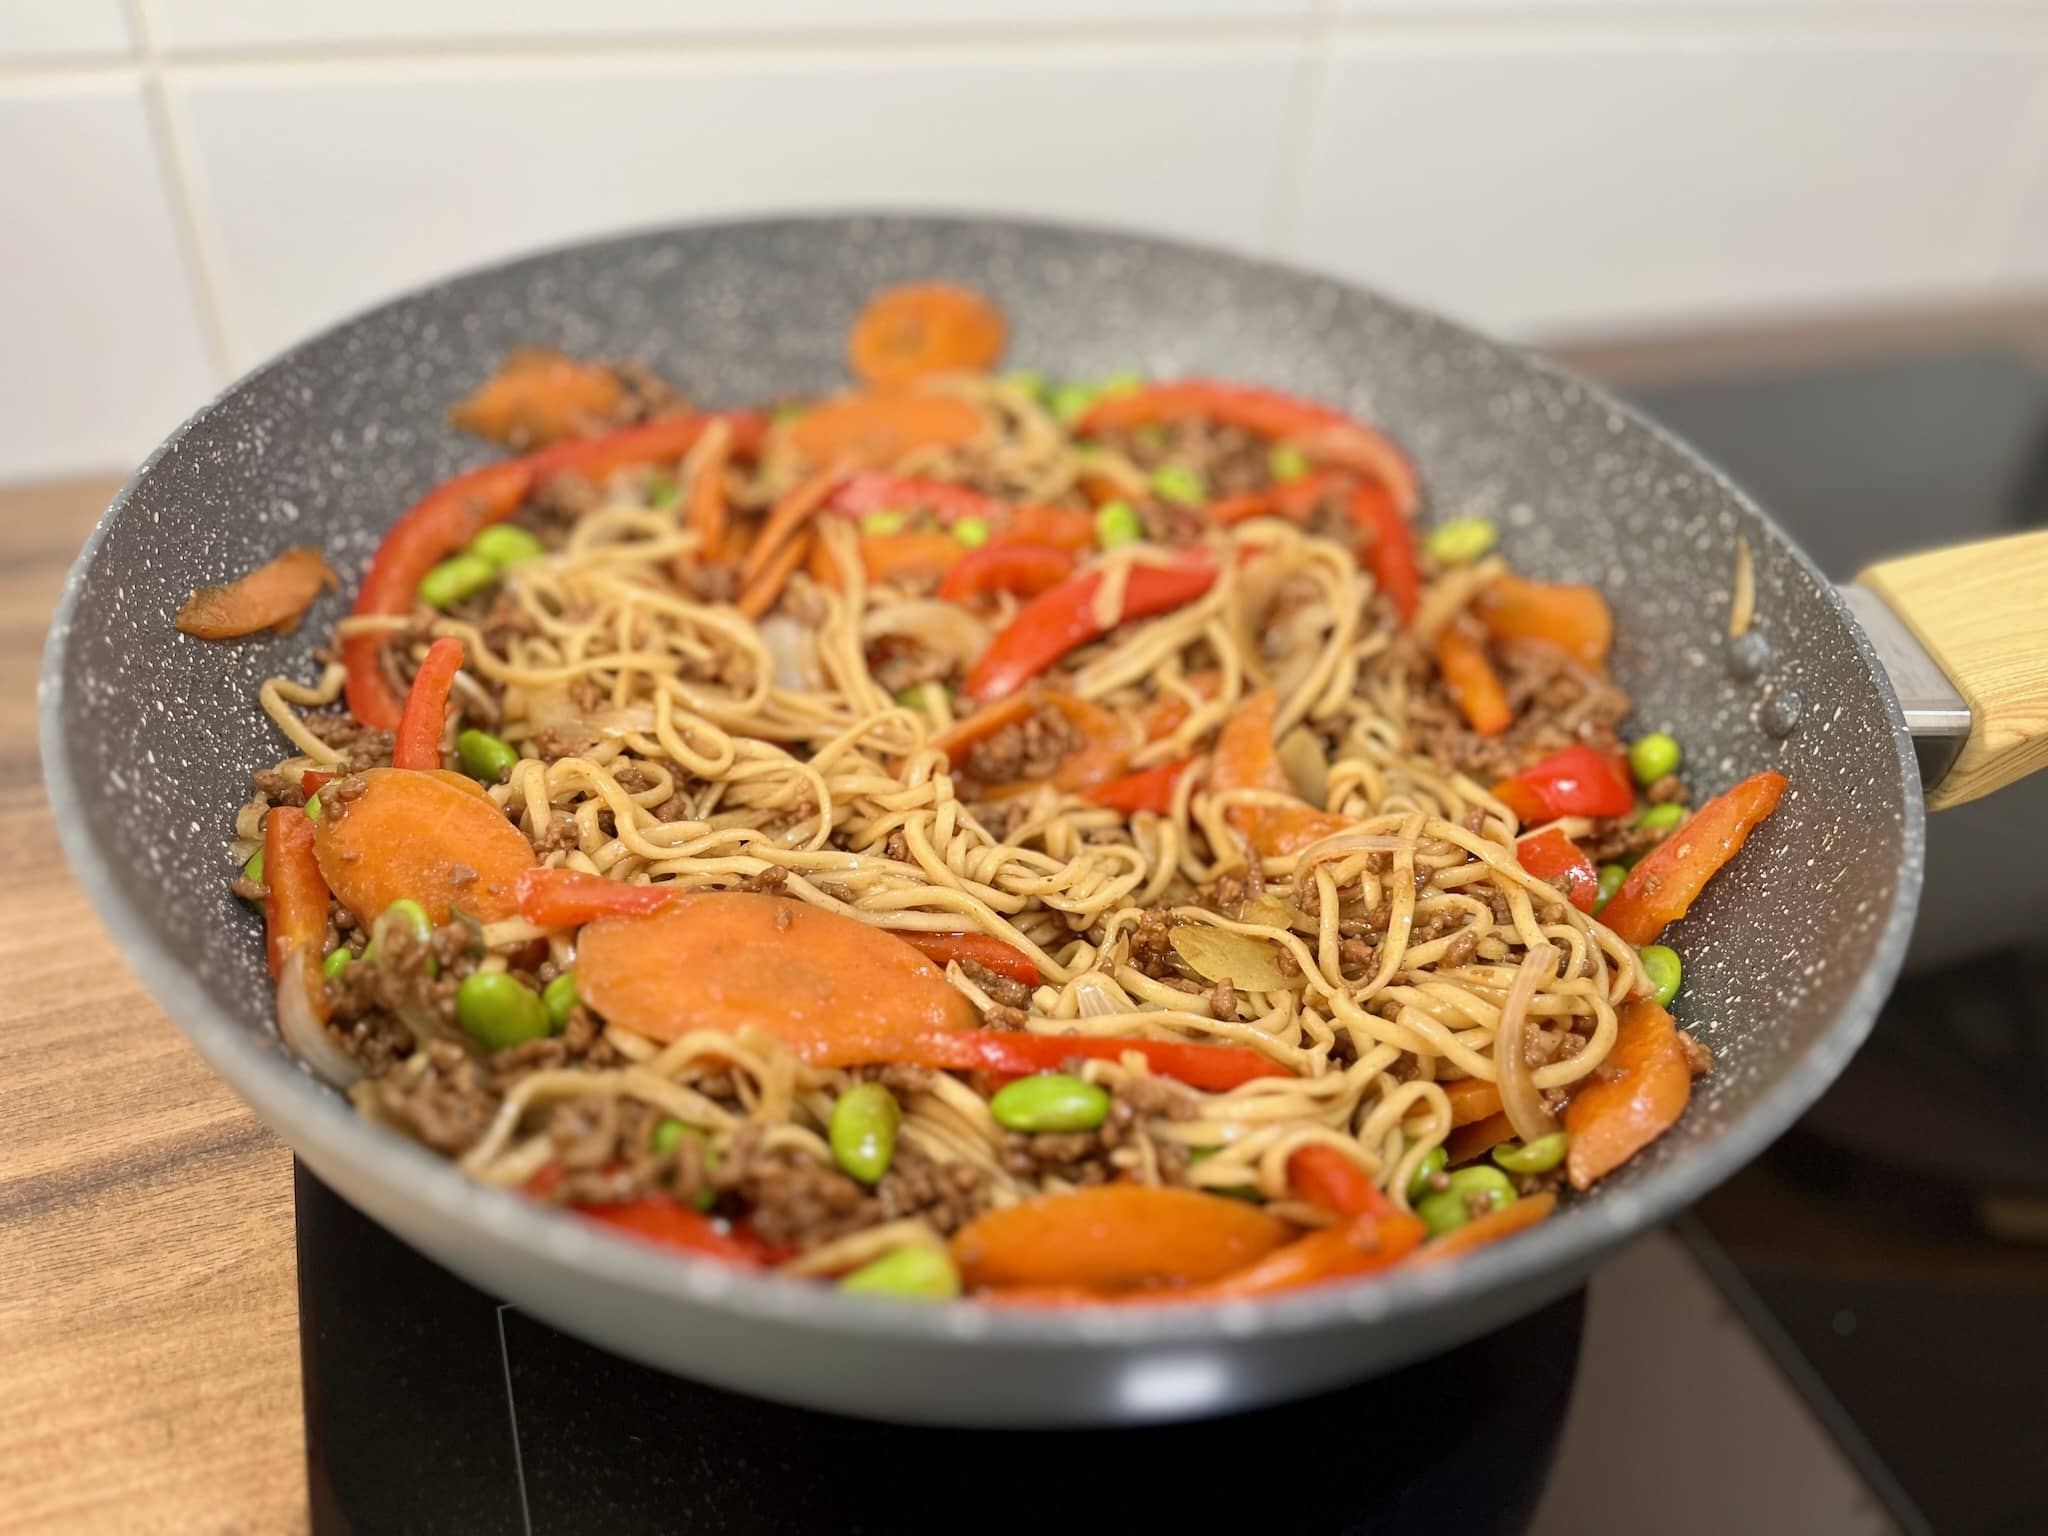 Ground beef stir-fry is almost ready in the pan